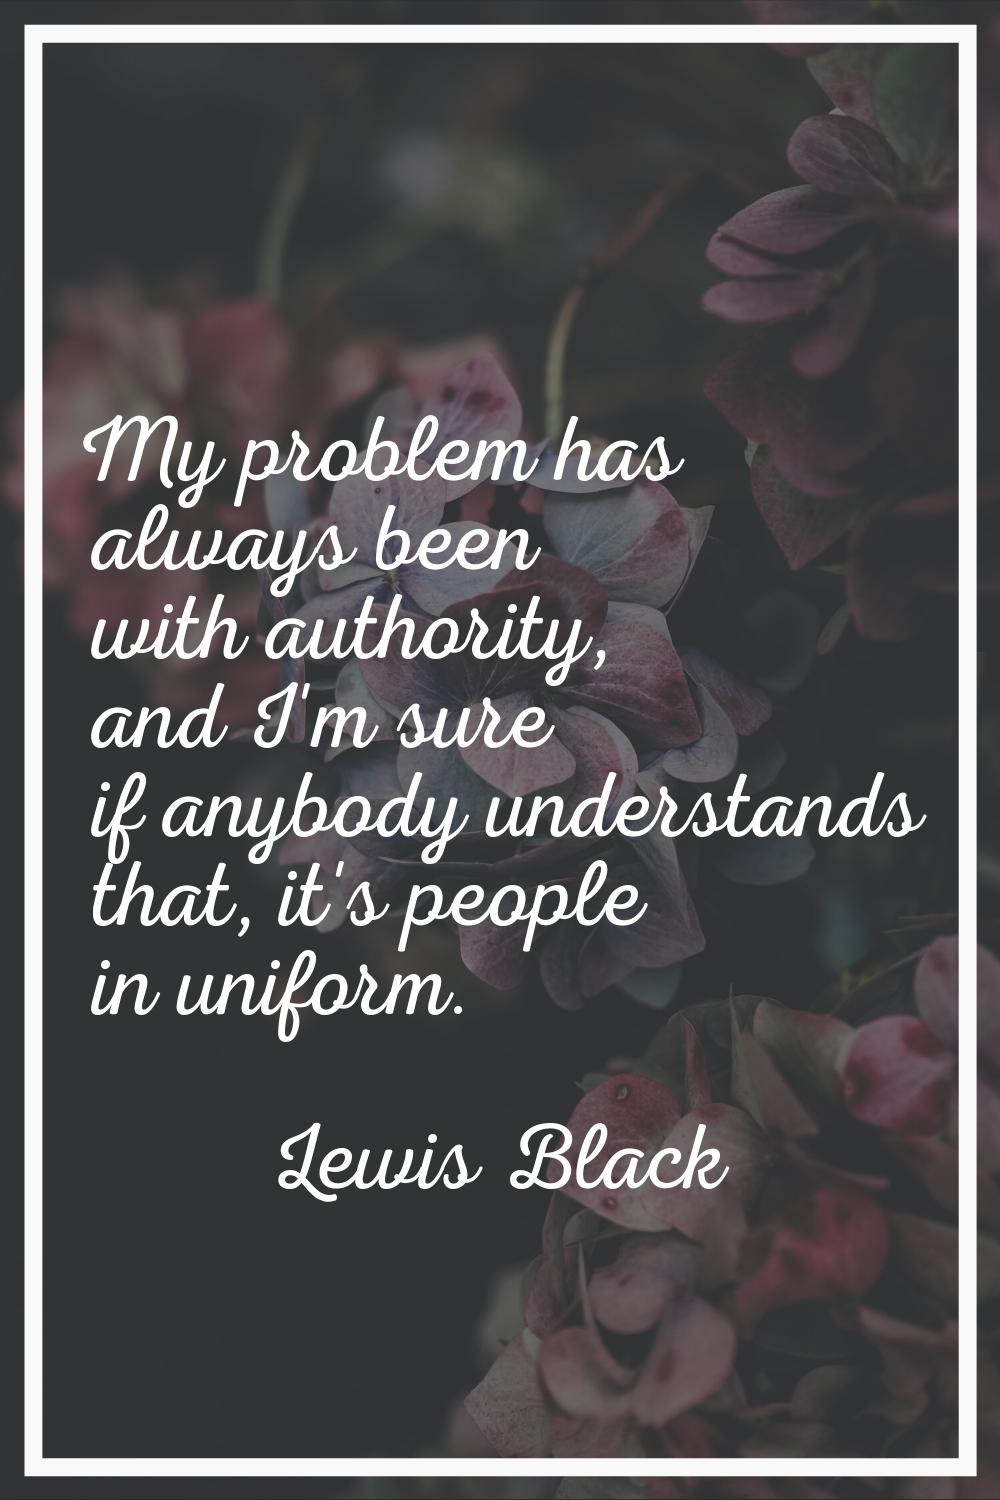 My problem has always been with authority, and I'm sure if anybody understands that, it's people in